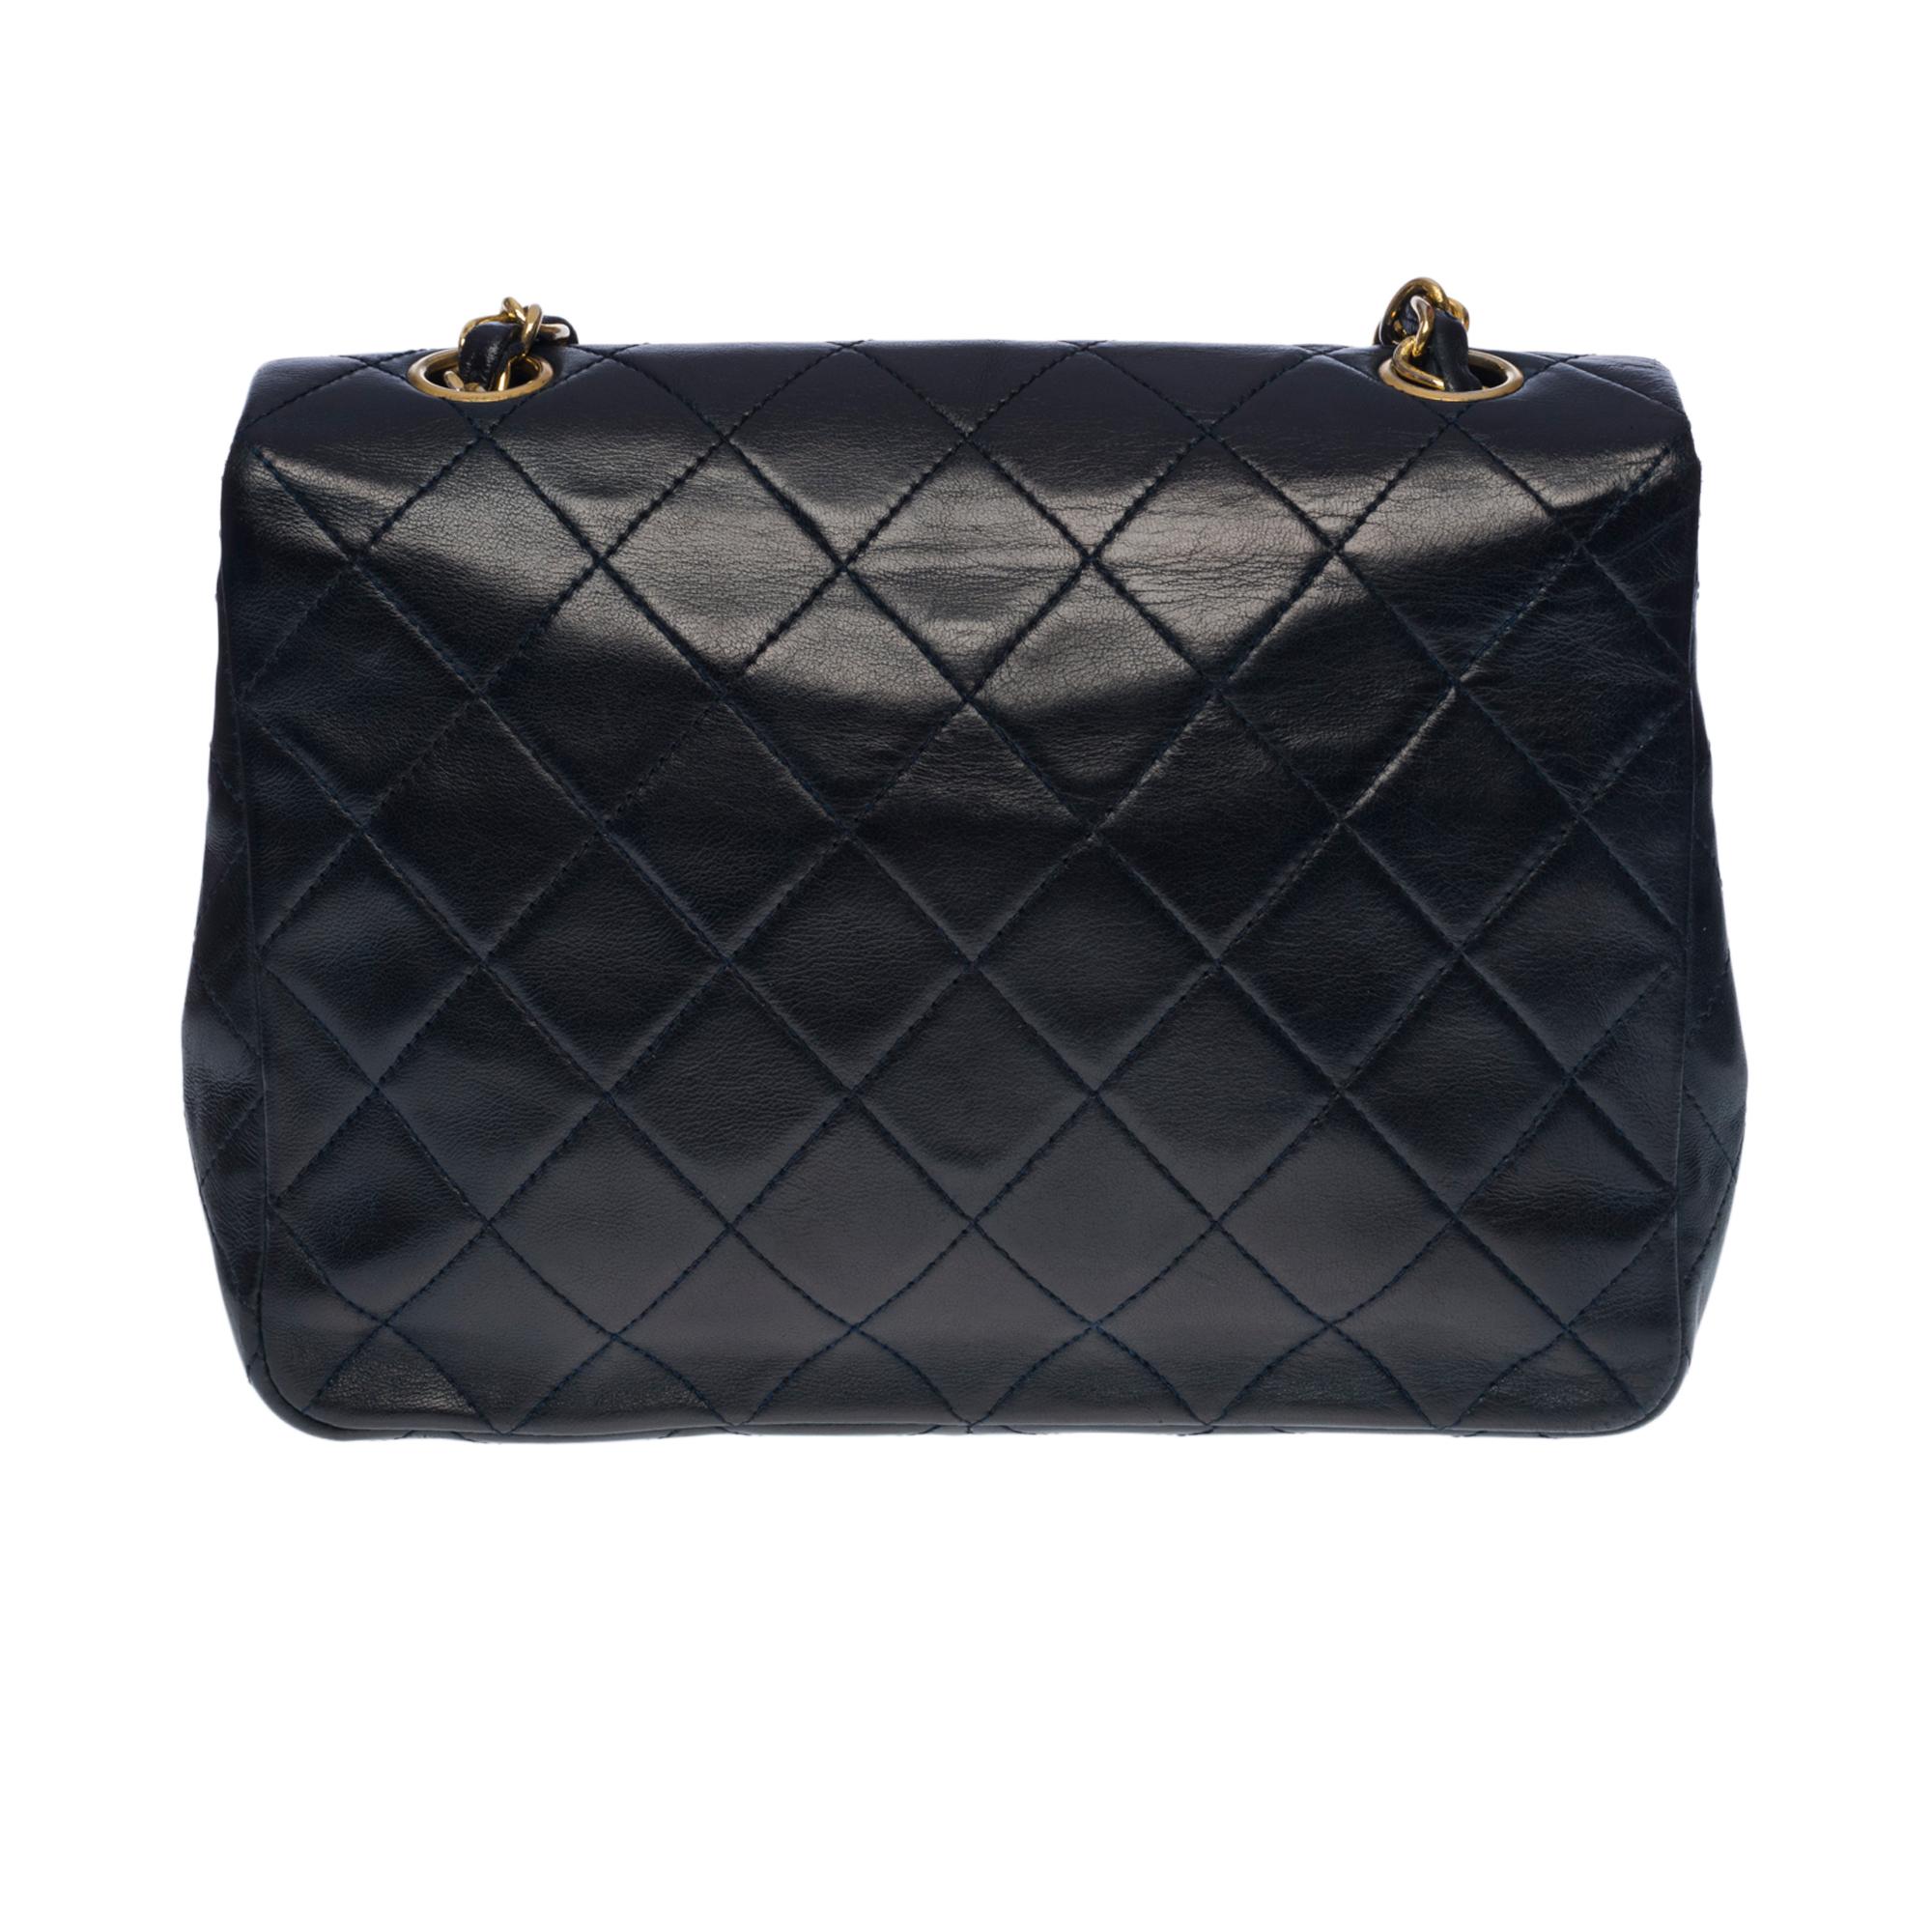 Gorgeous Chanel Mini Timeless Flap bag in navy blue quilted lambskin, gold metal hardware, gold metal chain interwoven with navy leather for a shoulder and shoulder strap

Backpack pocket
Flap closure, gold-tone CC clasp
Single Flap
Inner lining in